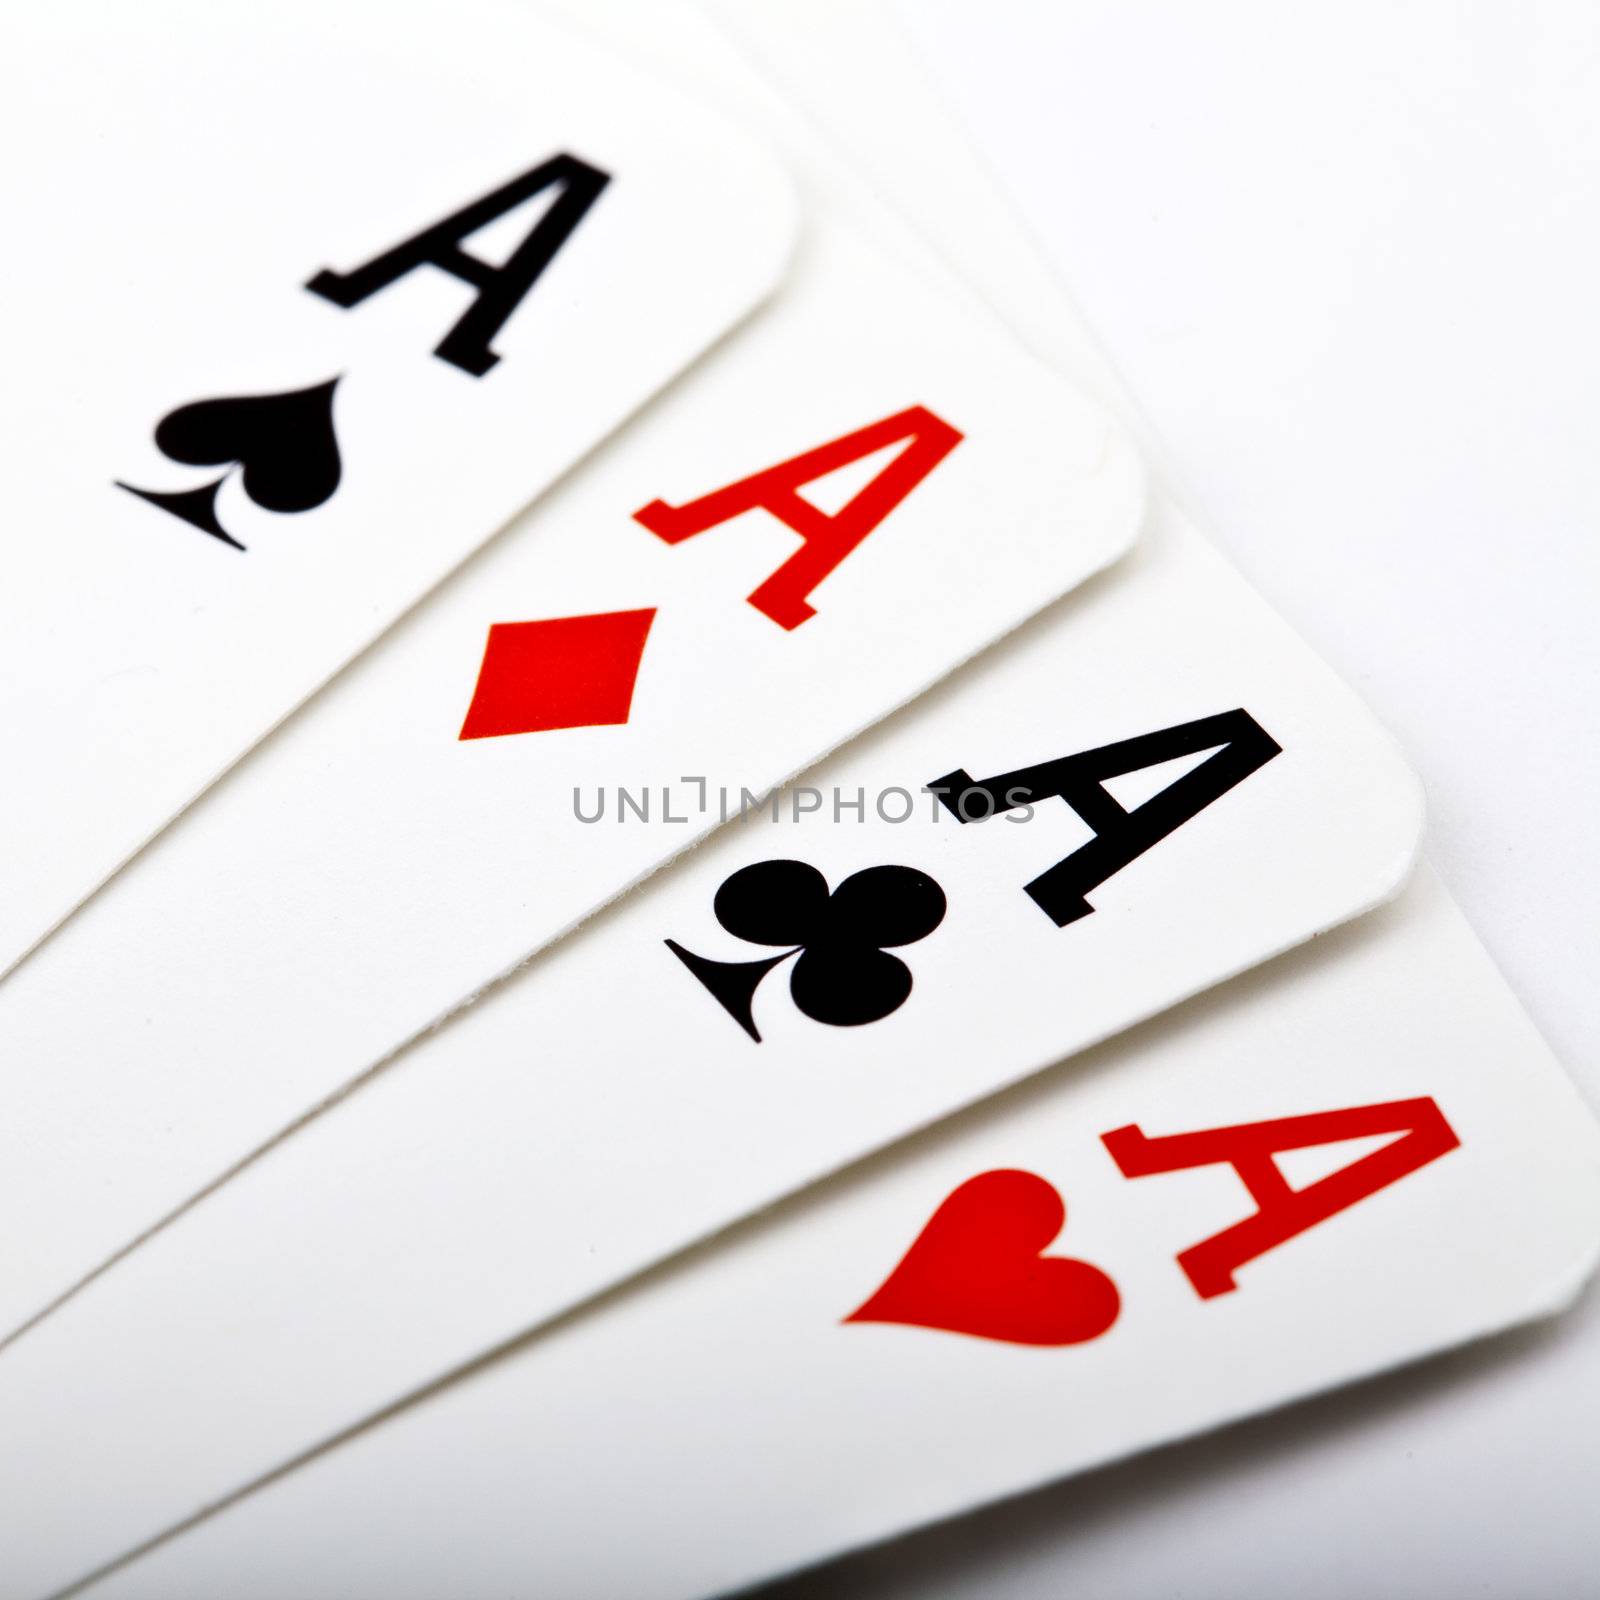 Four Aces laid flat on a white background.